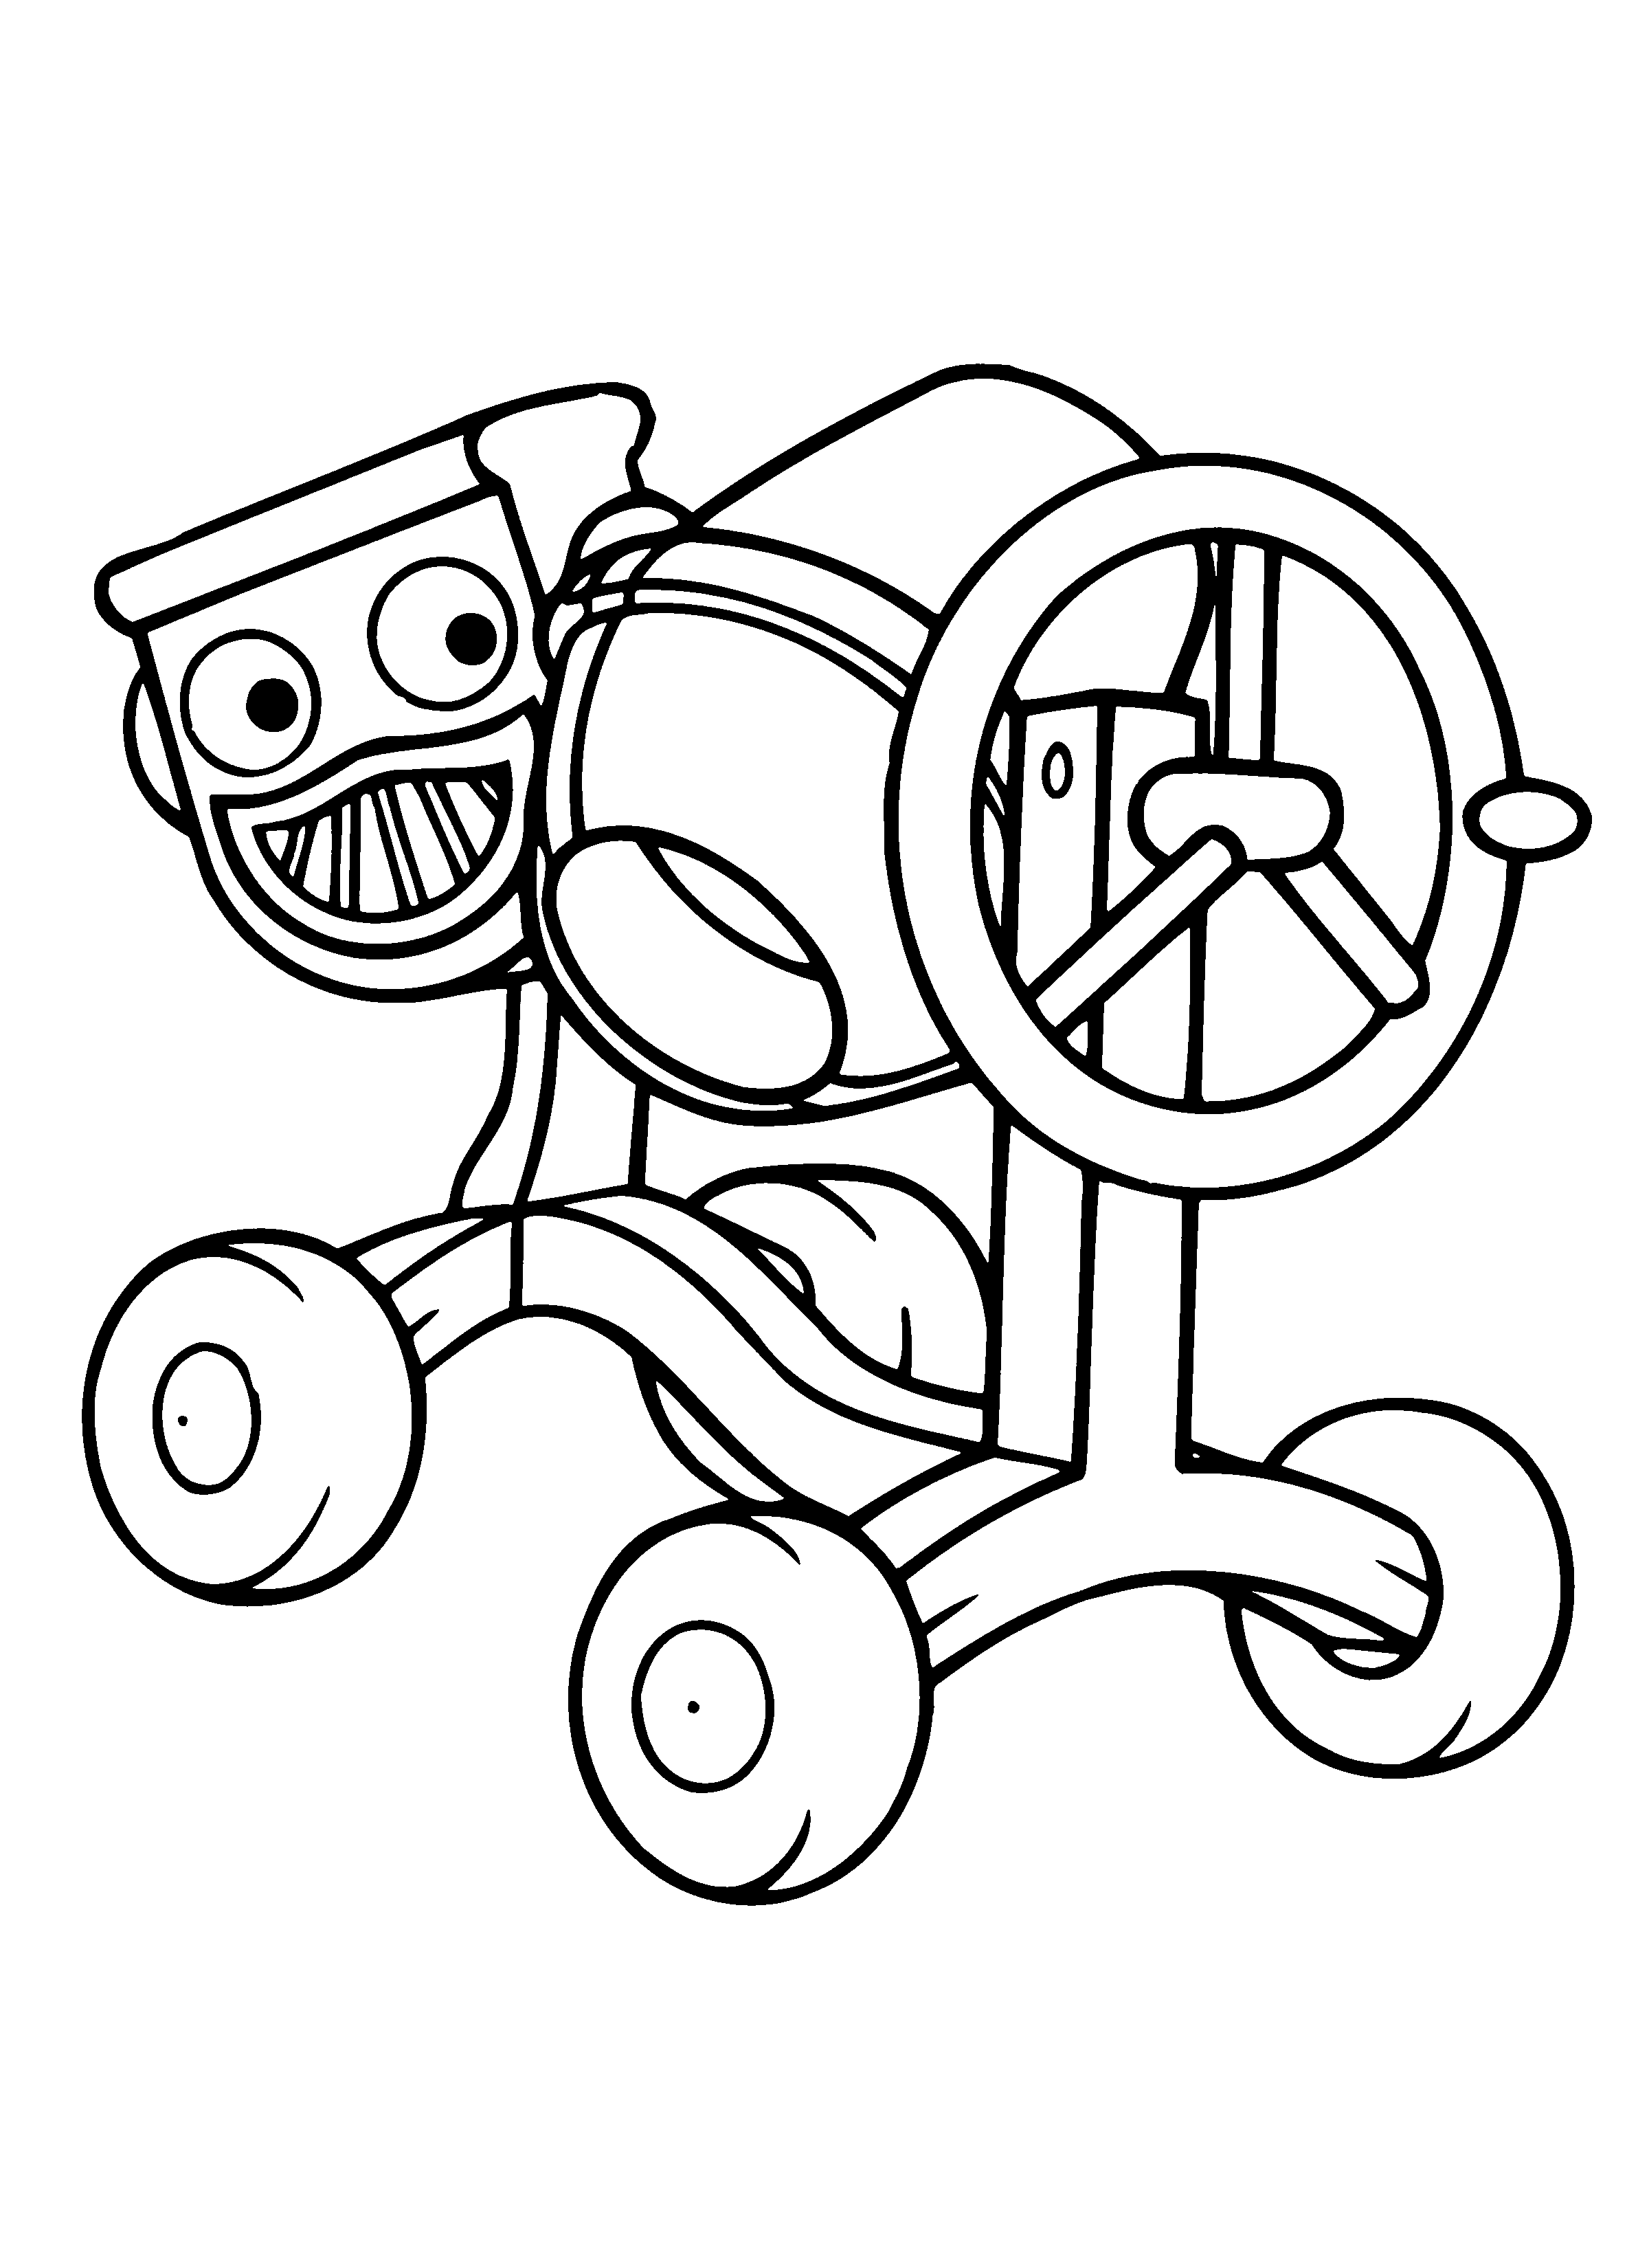 Bob The Builder Cement Mixer Tool Coloring Pages For Kids #cJY ...